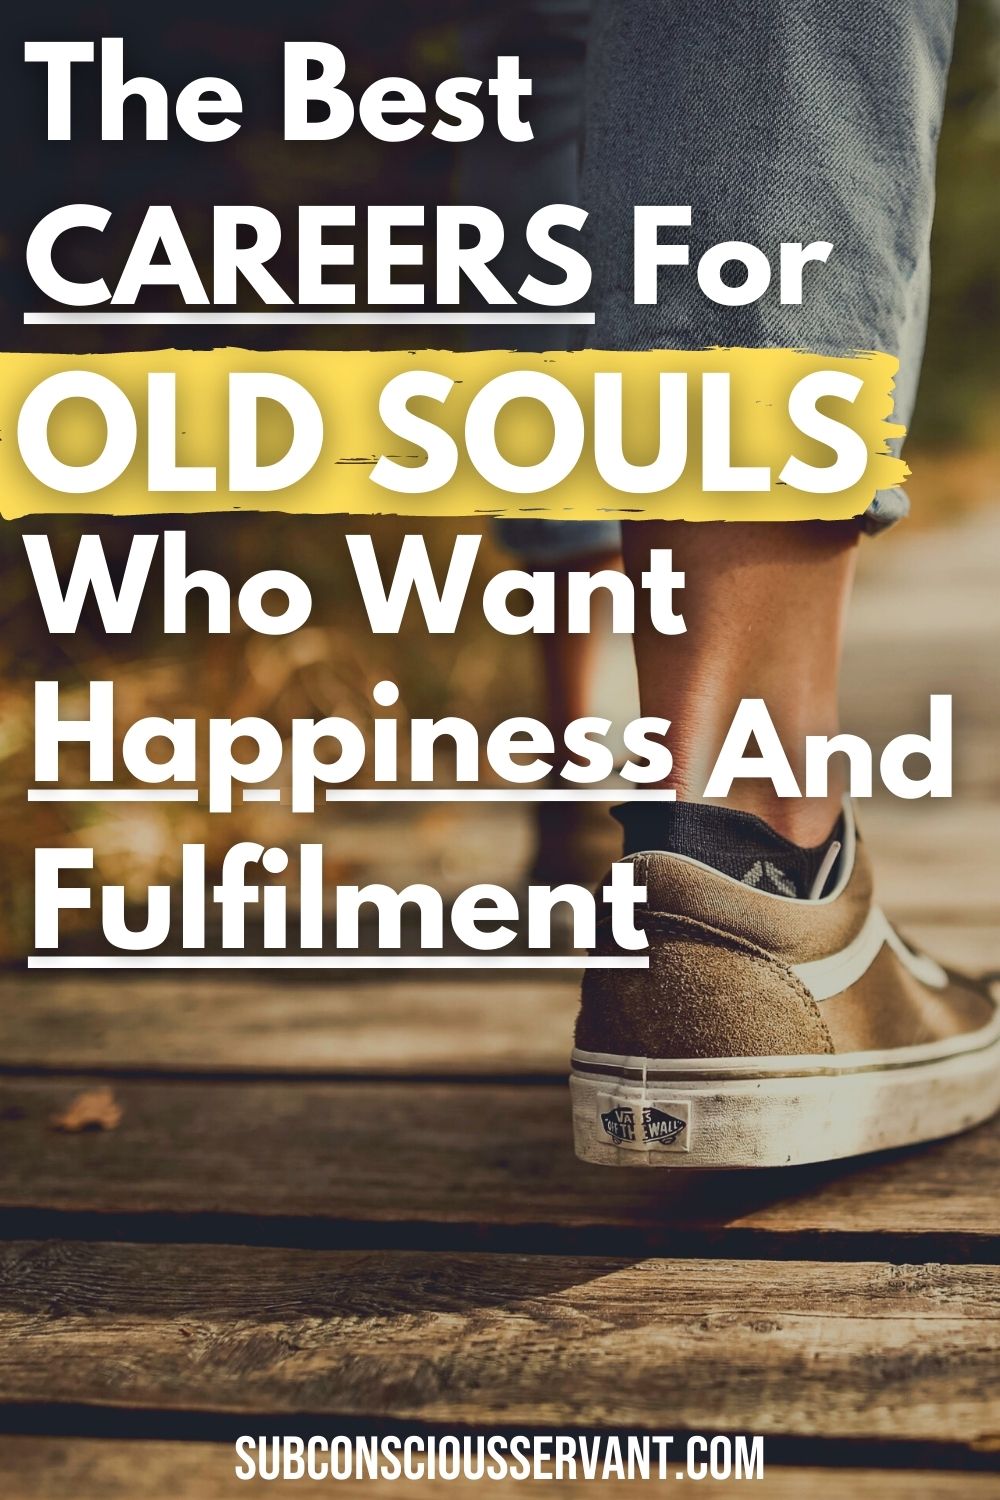 Revealed: The Best Careers for Old Souls Who Want Fulfillment